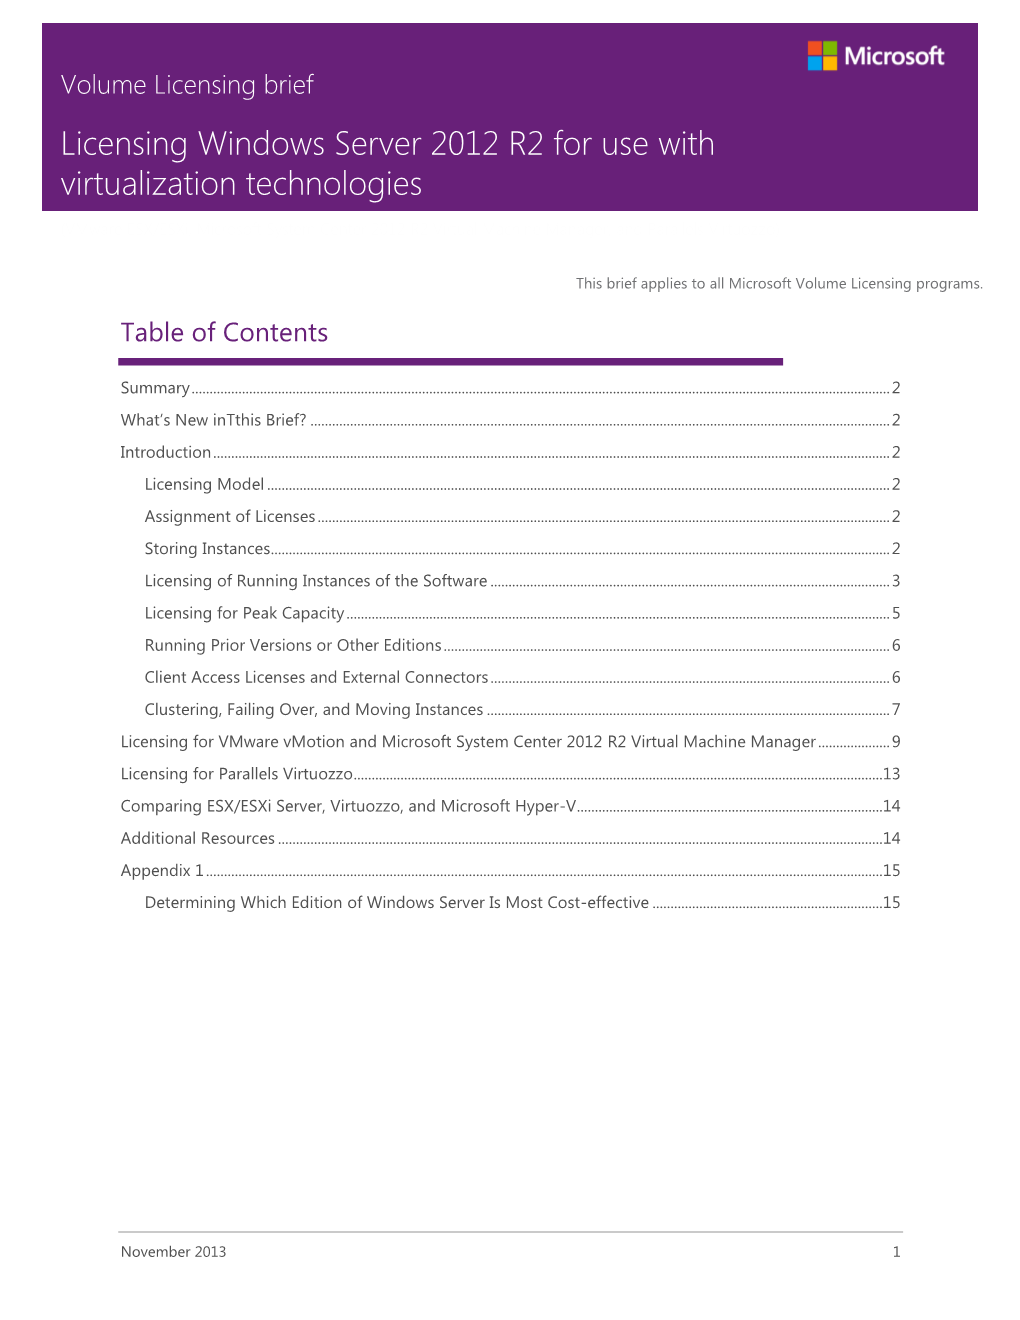 Licensing Windows Server 2012 R2 for Use with Virtualization Technologies